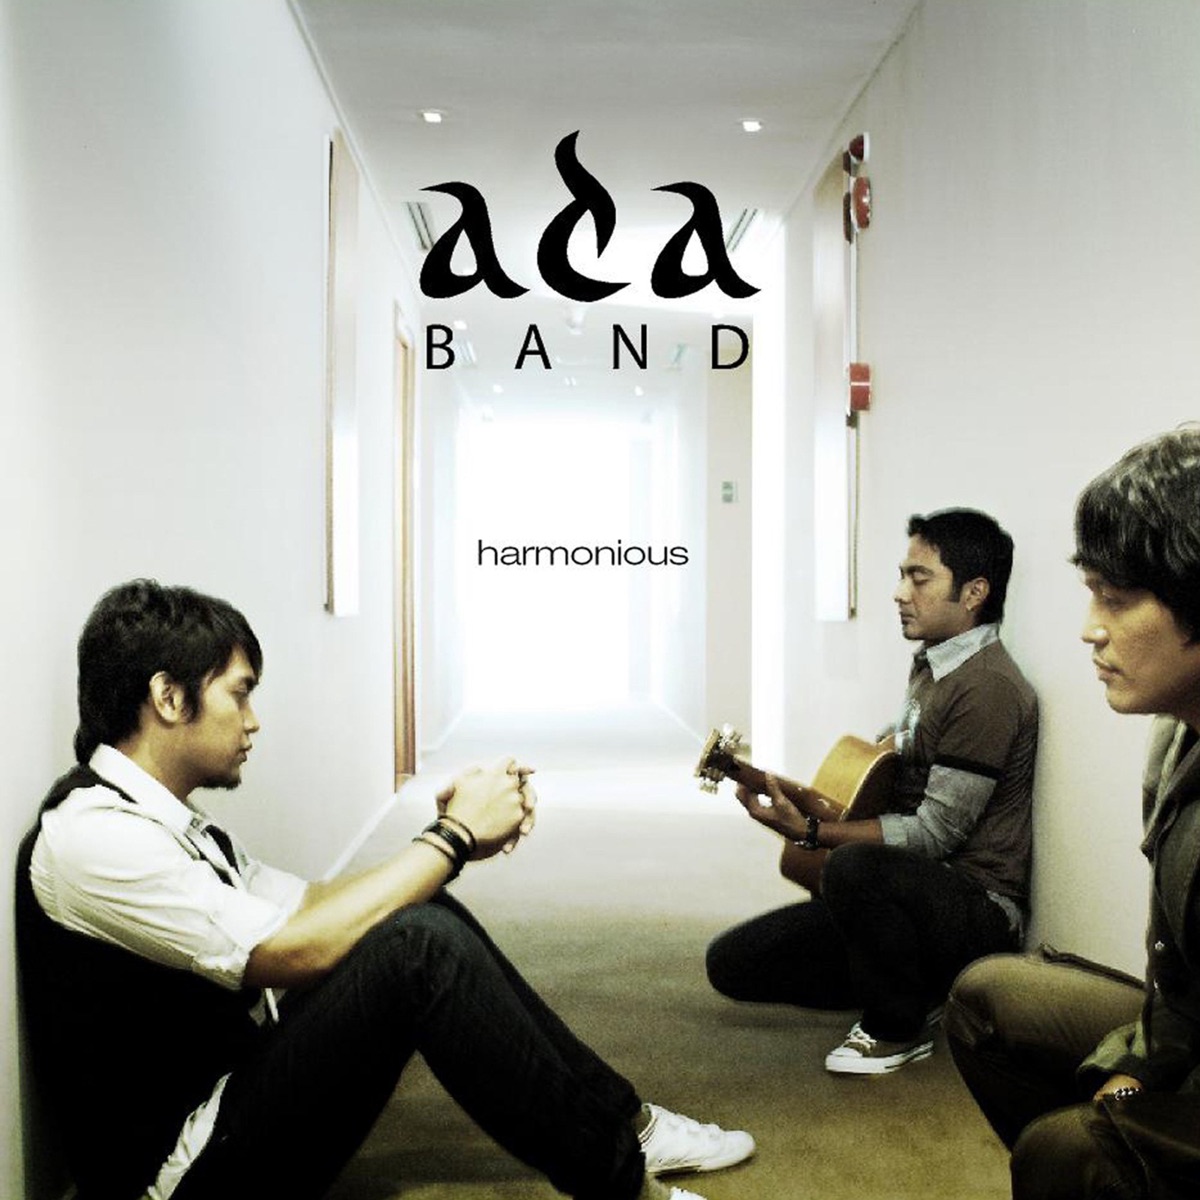 The Best Of (Discography) by ADA Band on Apple Music